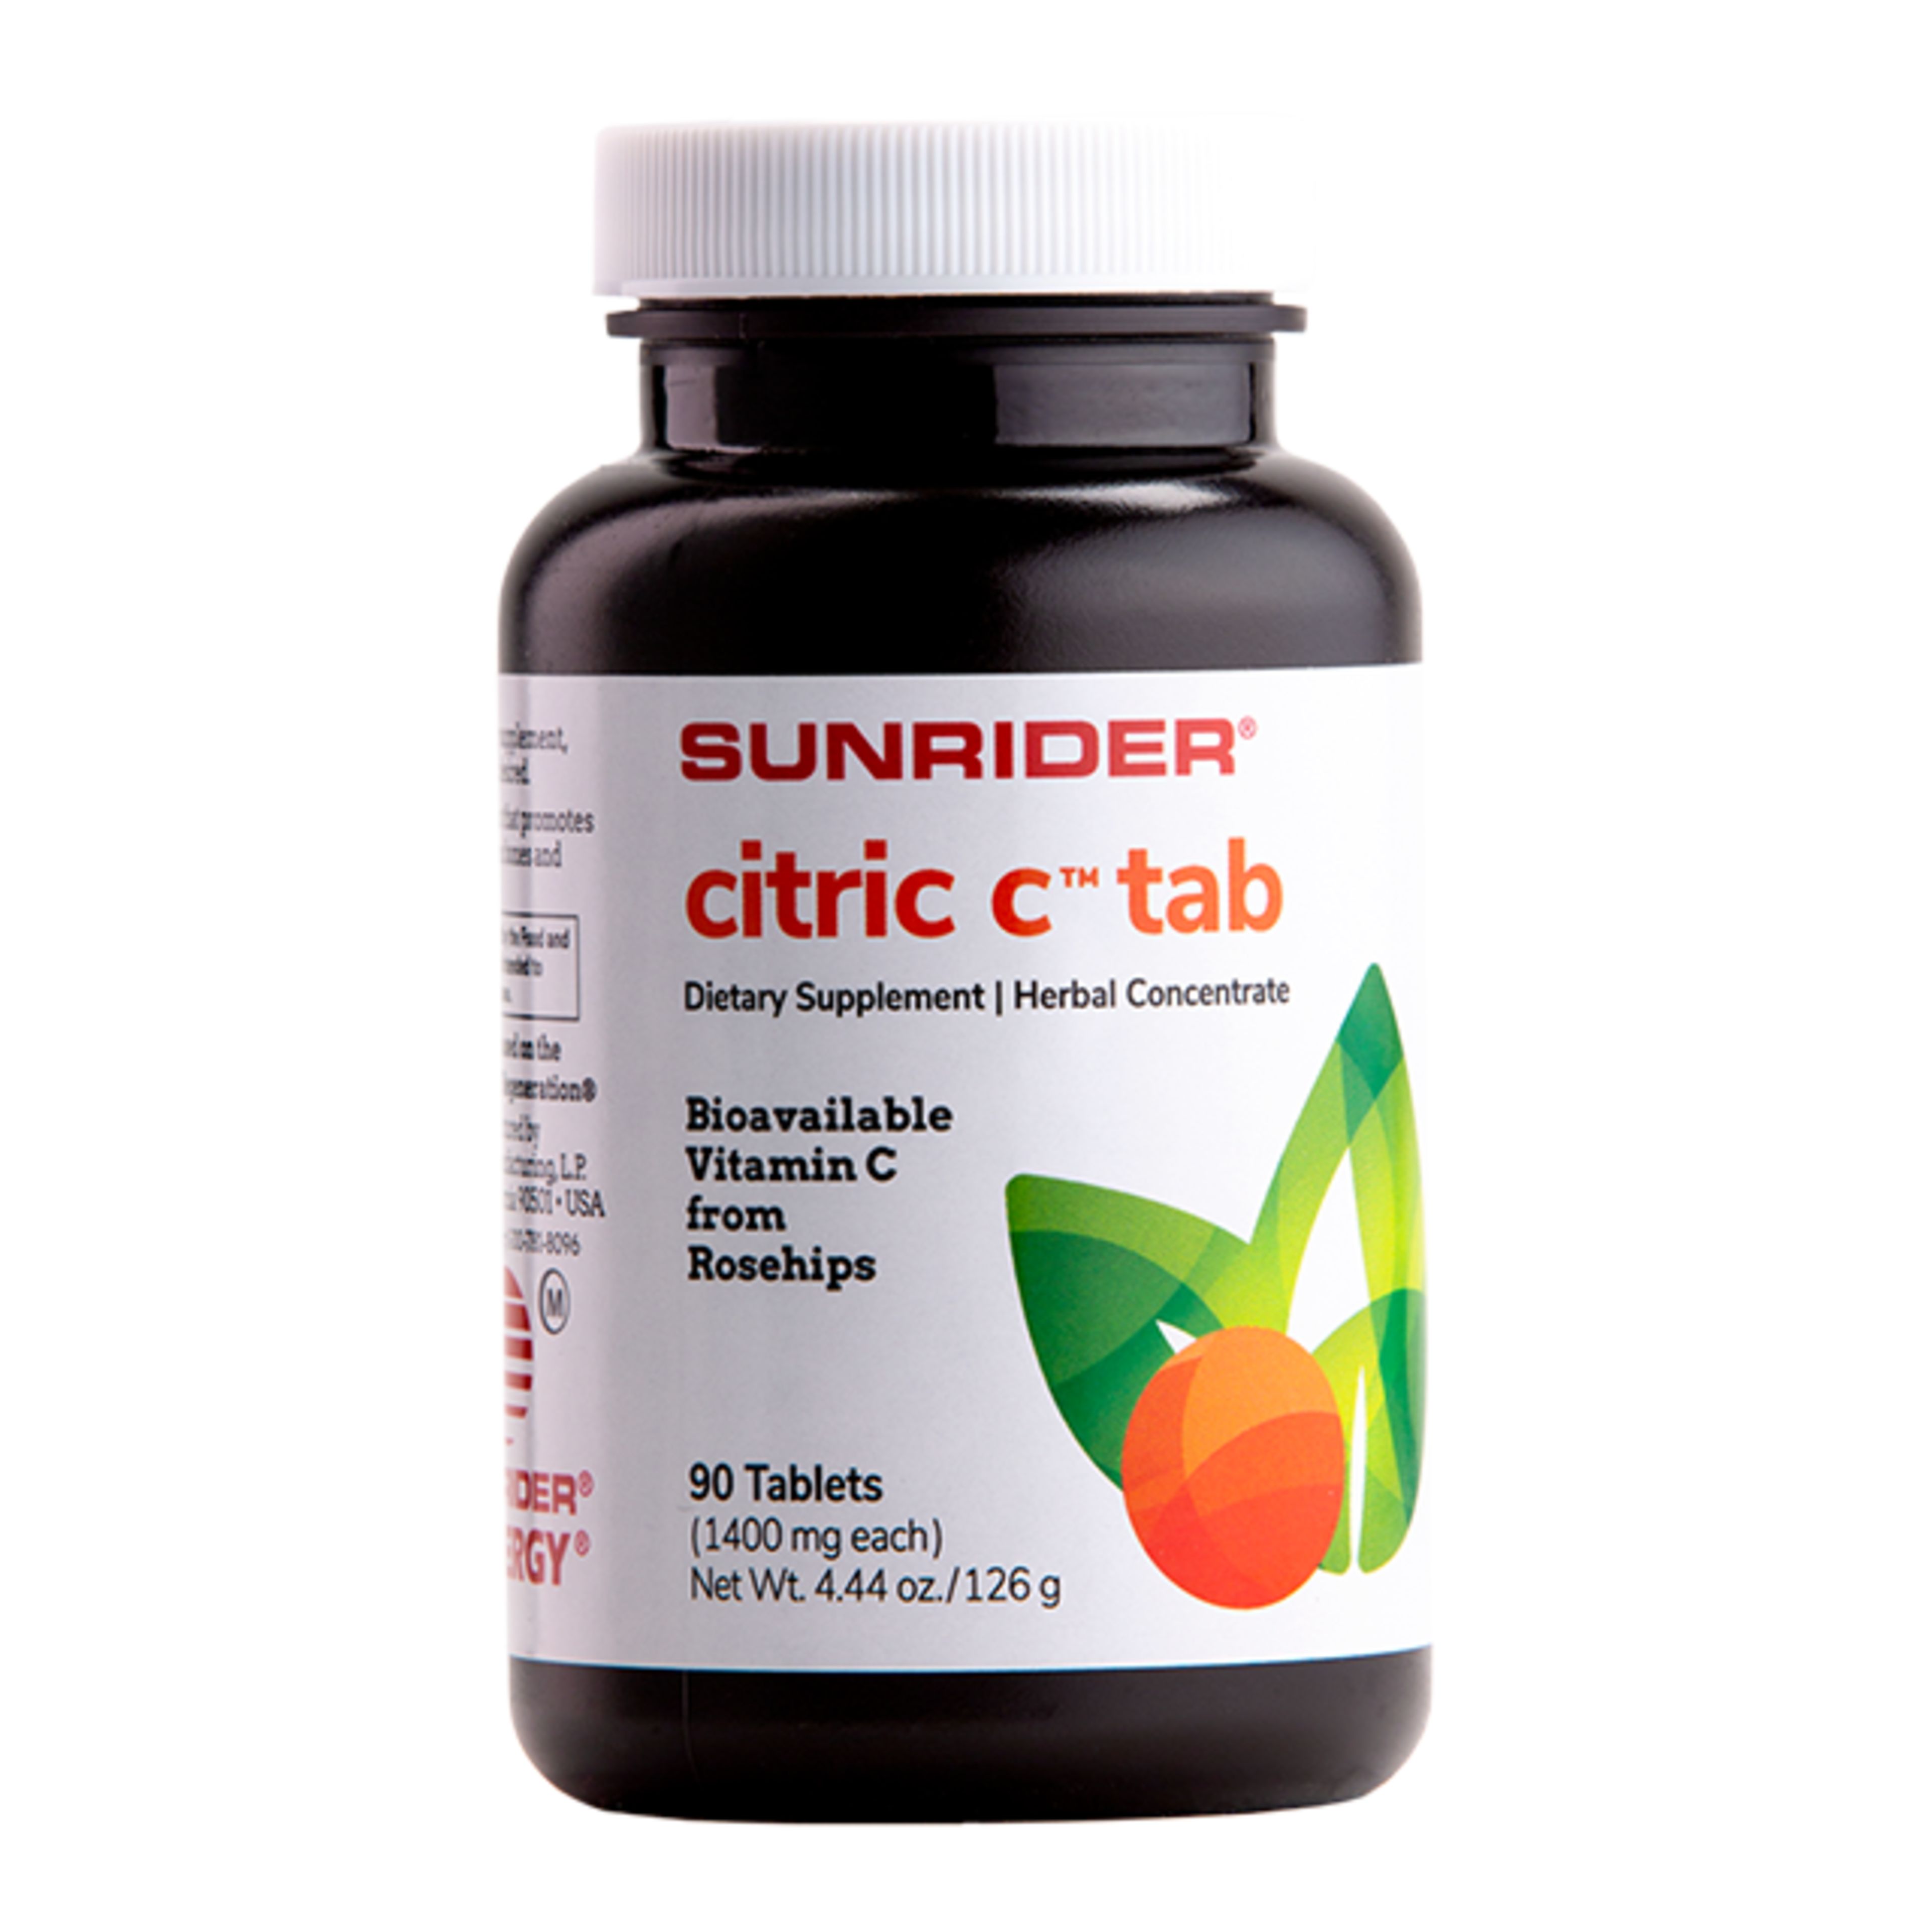 Citric C™ Tab 90 Tablets (1400 mg each tablet)